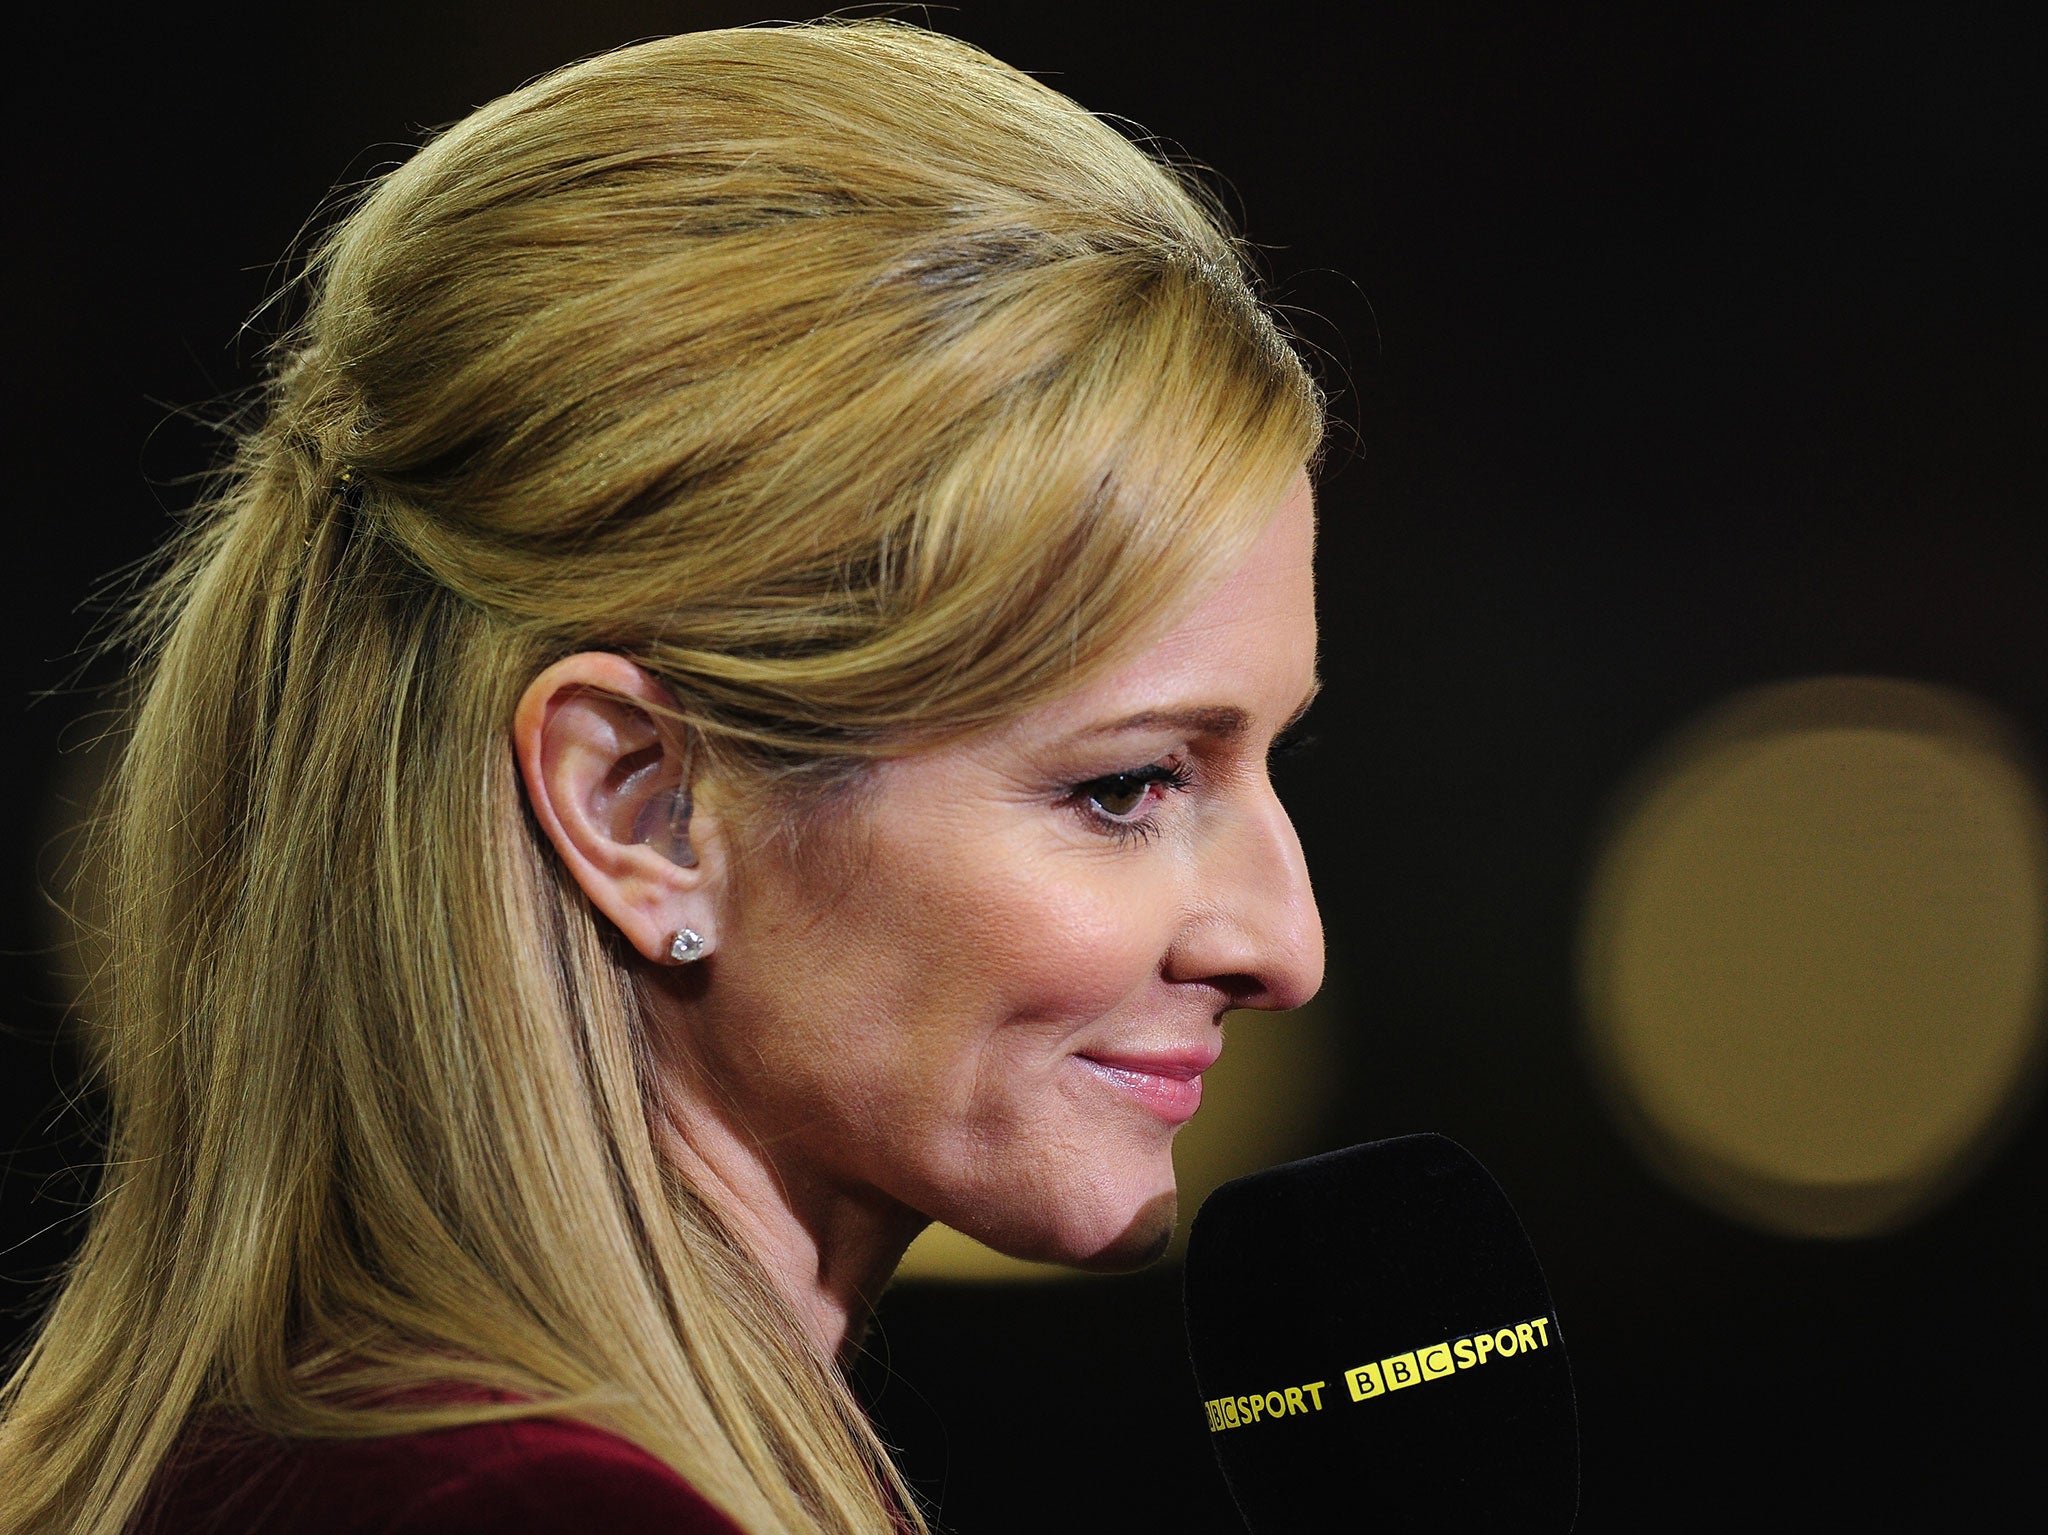 TV presenter Gabby Logan looks on before the RBS Six Nations match between Wales and Scotland at Millennium Stadium on March 15, 2014 in Cardiff, Wales.